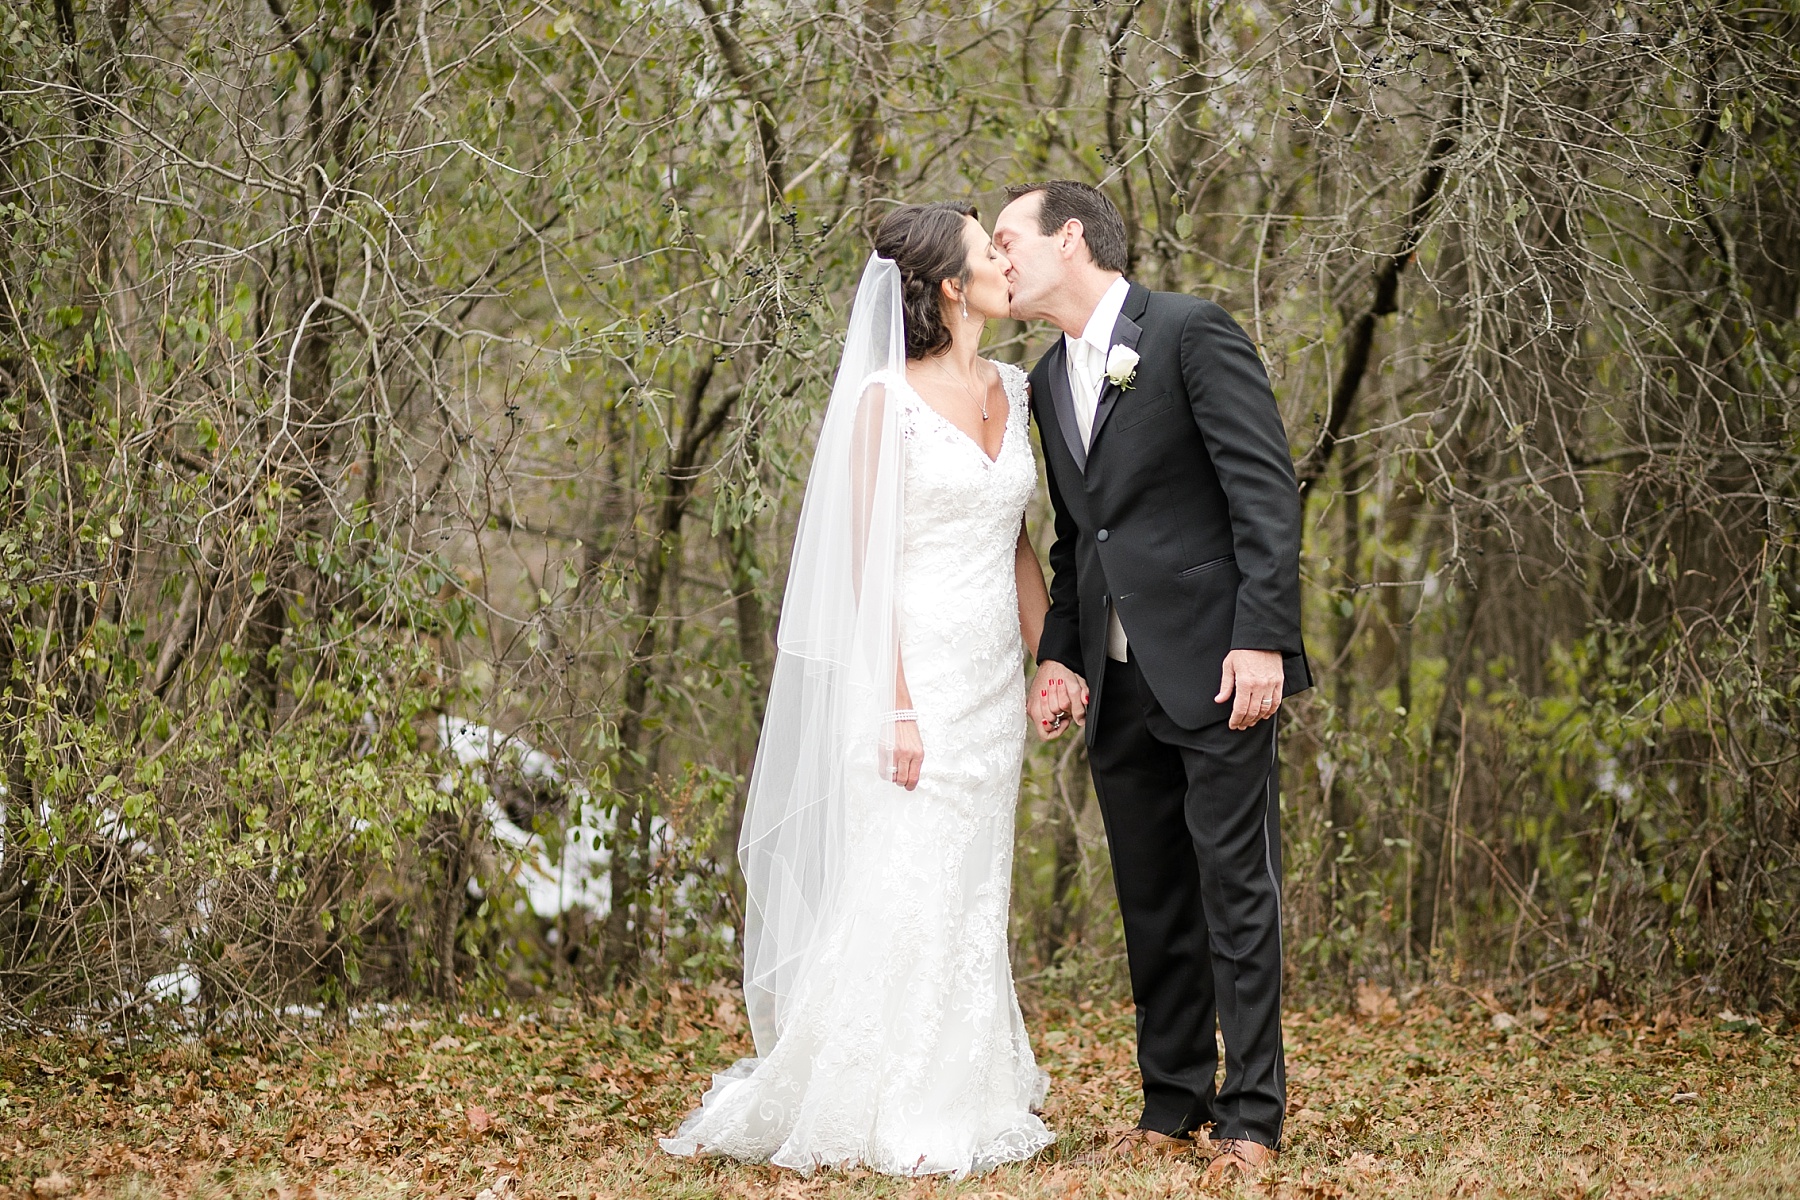 Kelly & Bob woke up to a light dusting of snow for their wedding at The Condensery wedding in Osseo, WI